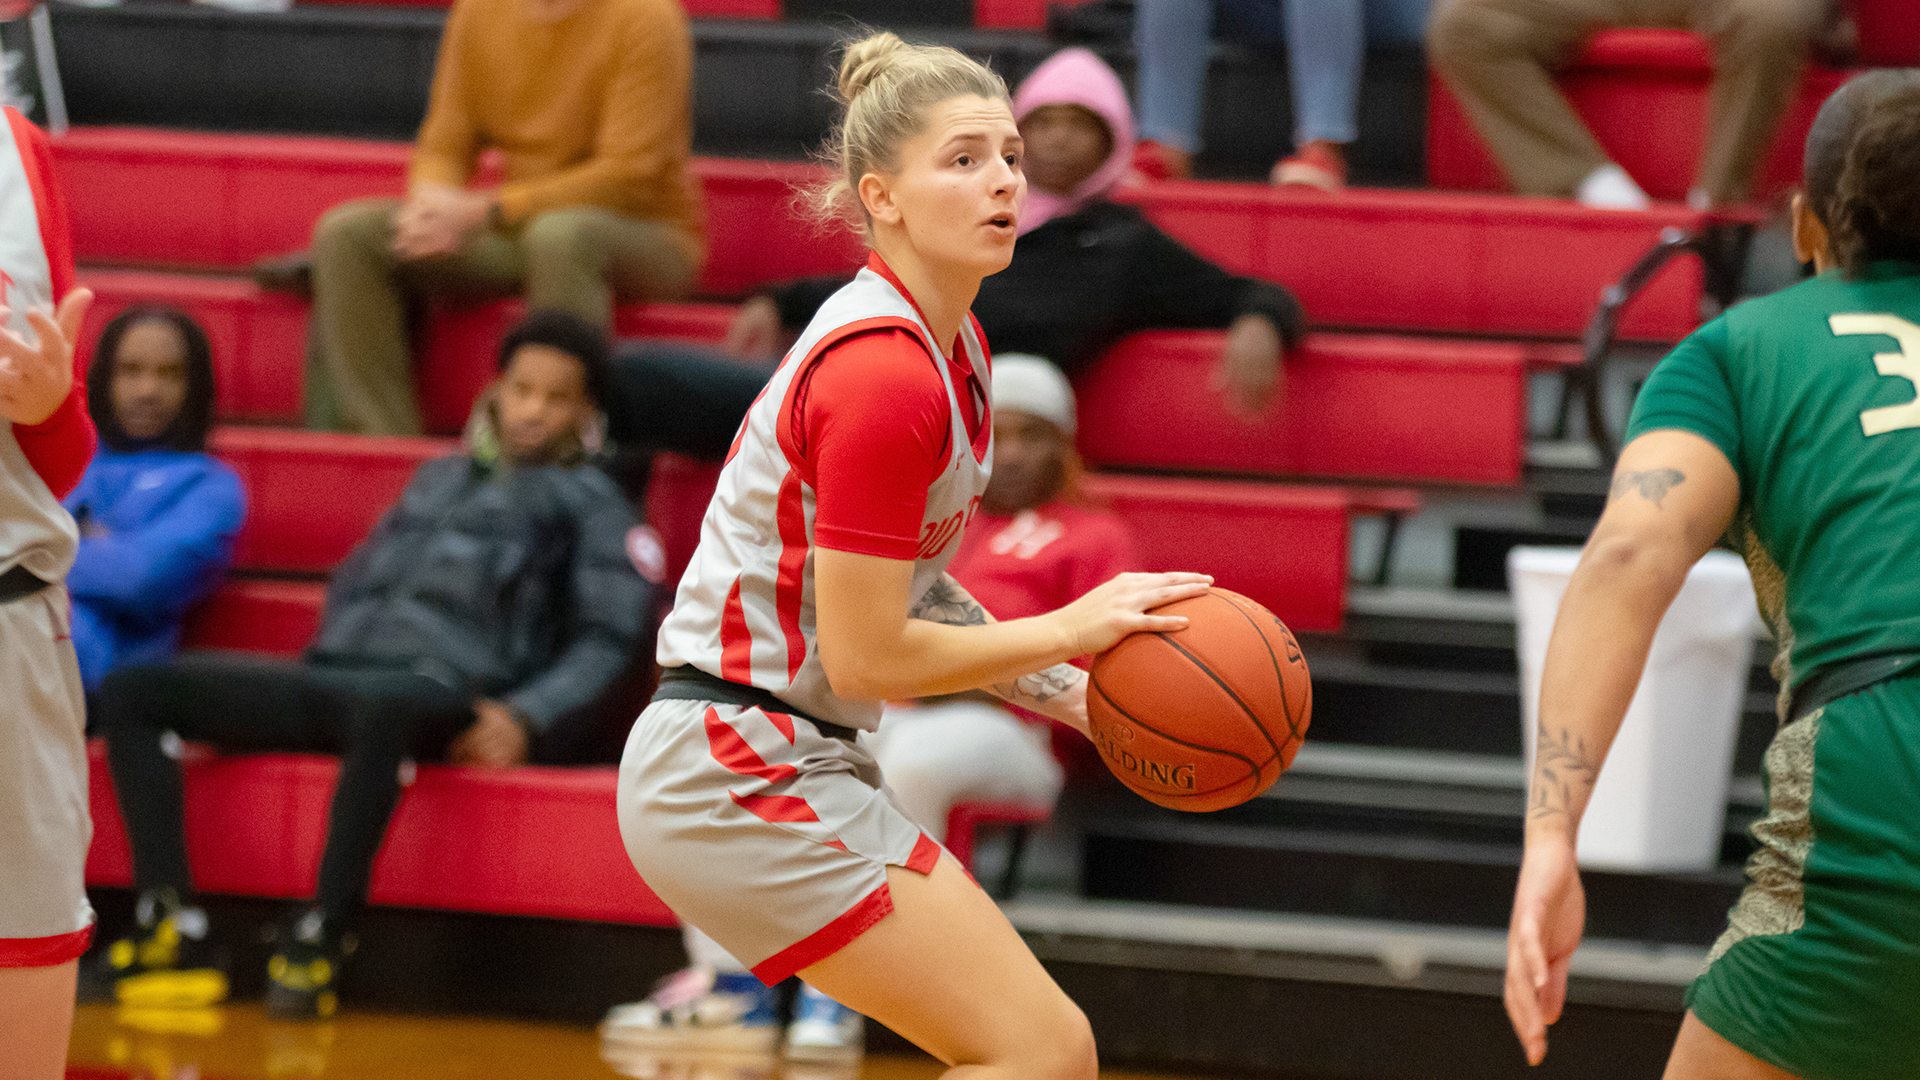 Willingham scores RSC Women's Basketball Player of the Week